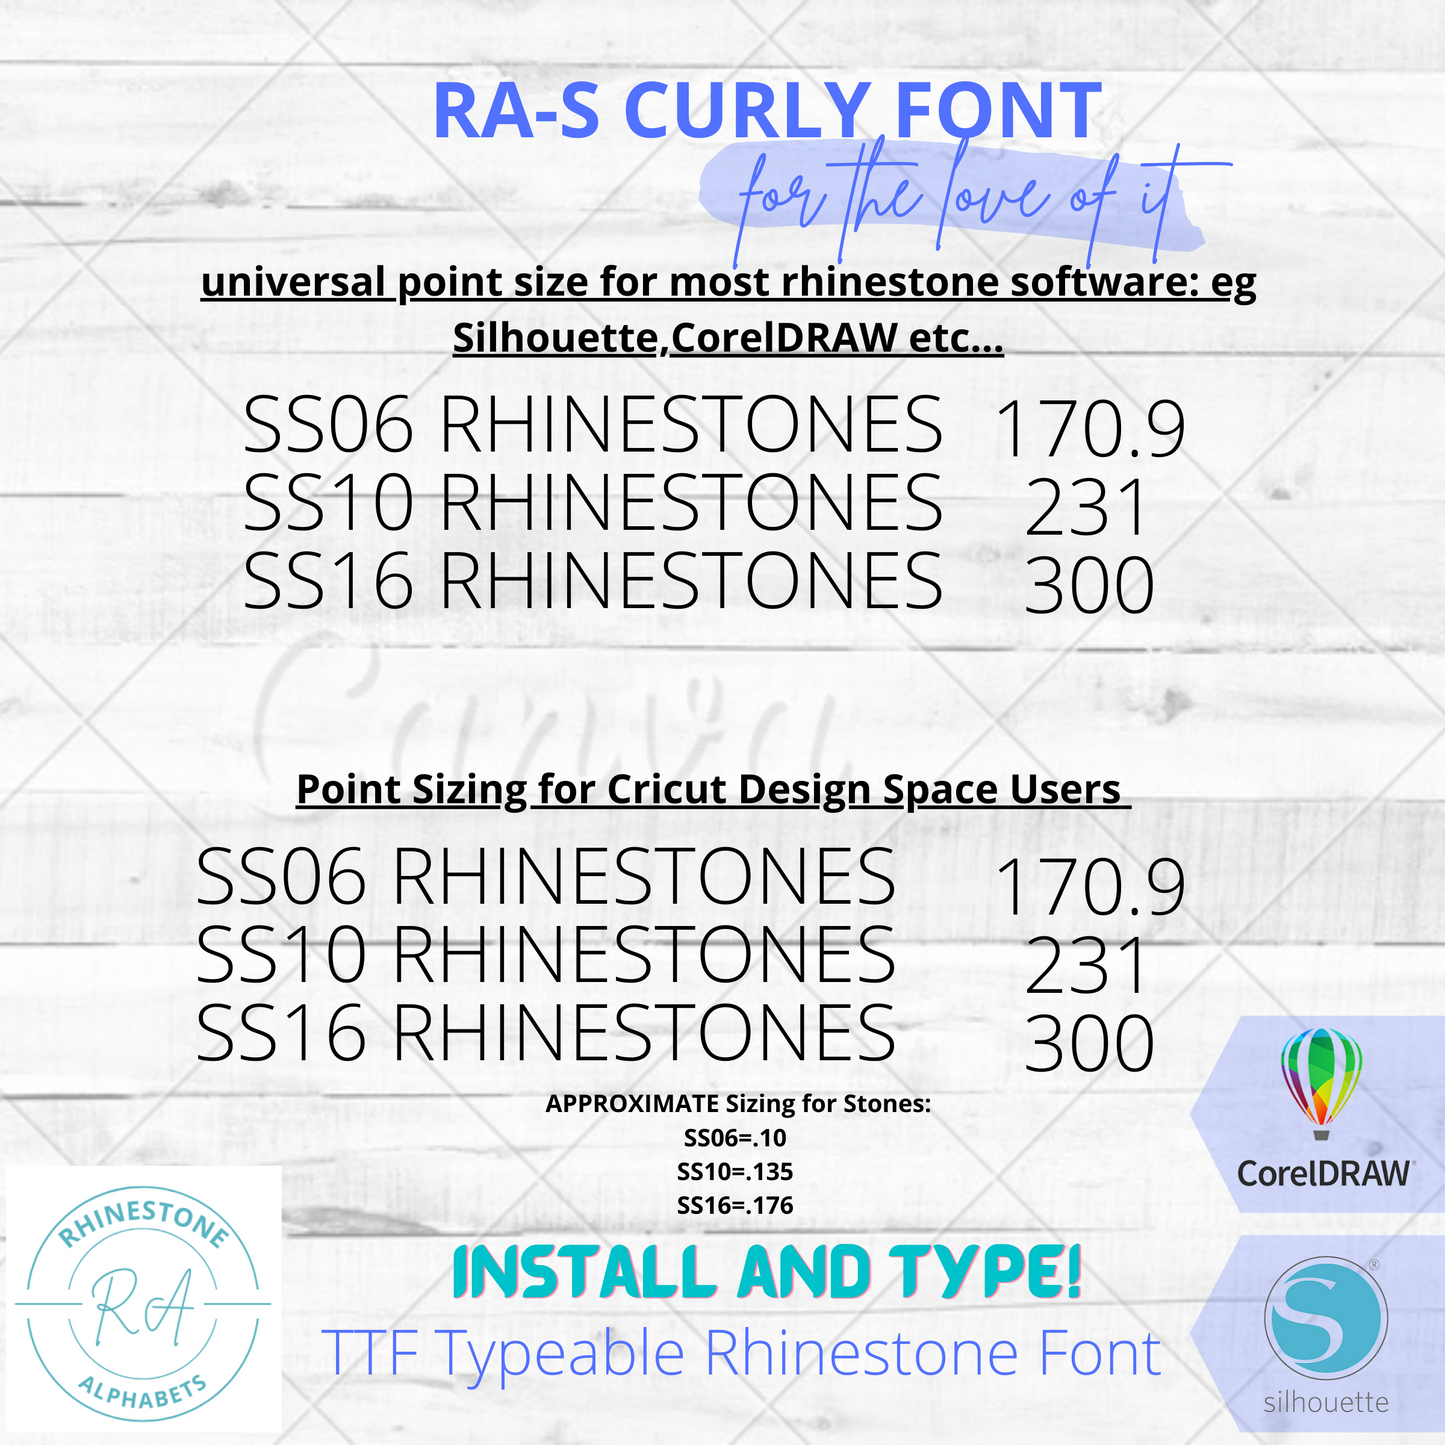 RA-S Curlyfont